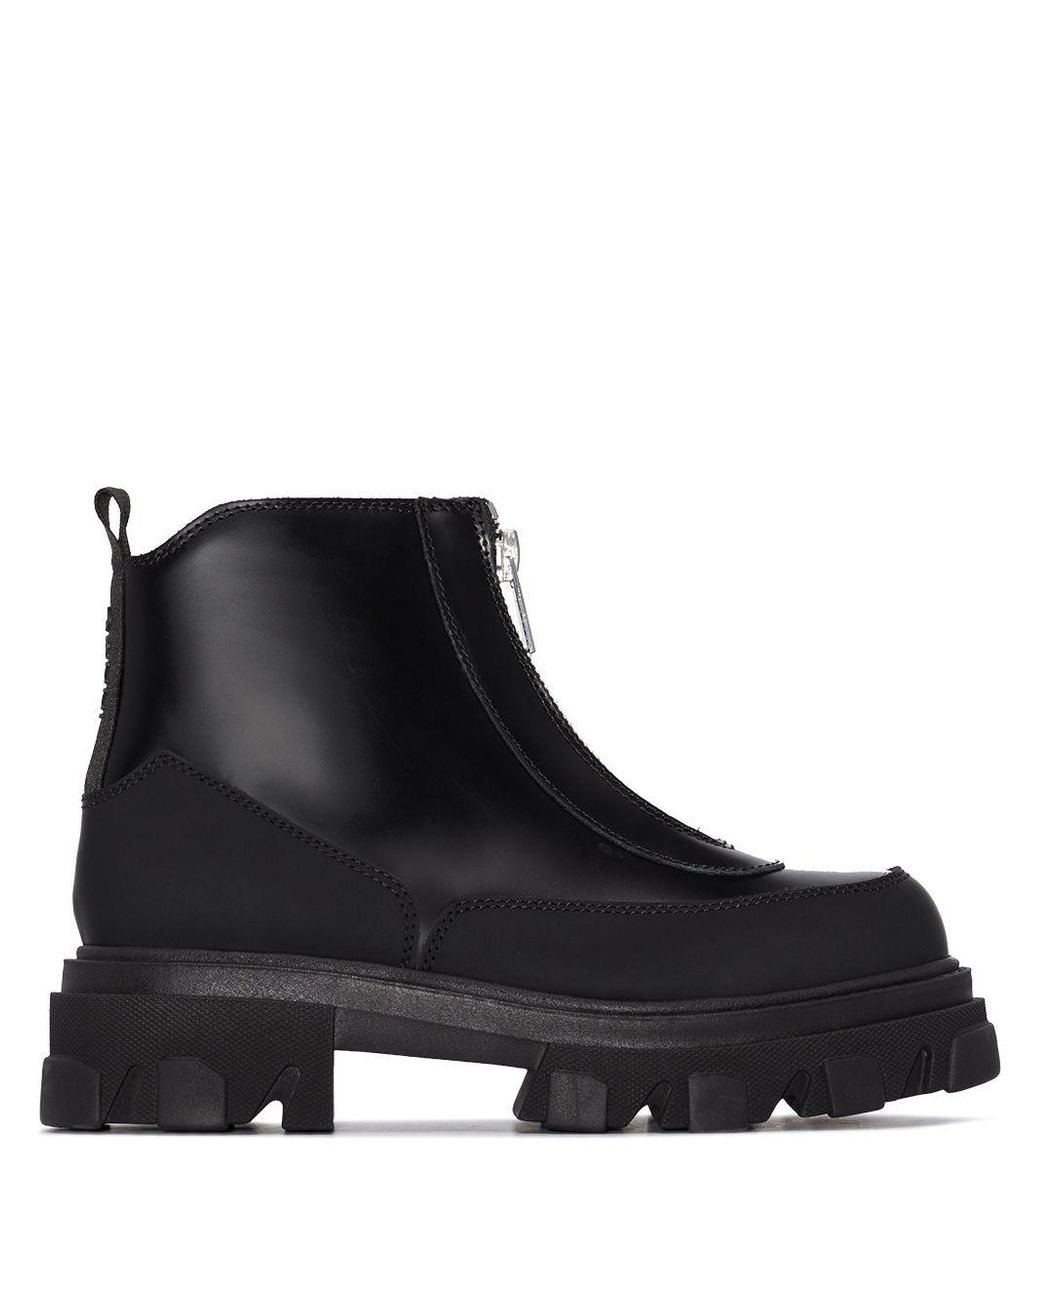 Ganni Zip-up Leather Ankle Boots in Black | Lyst